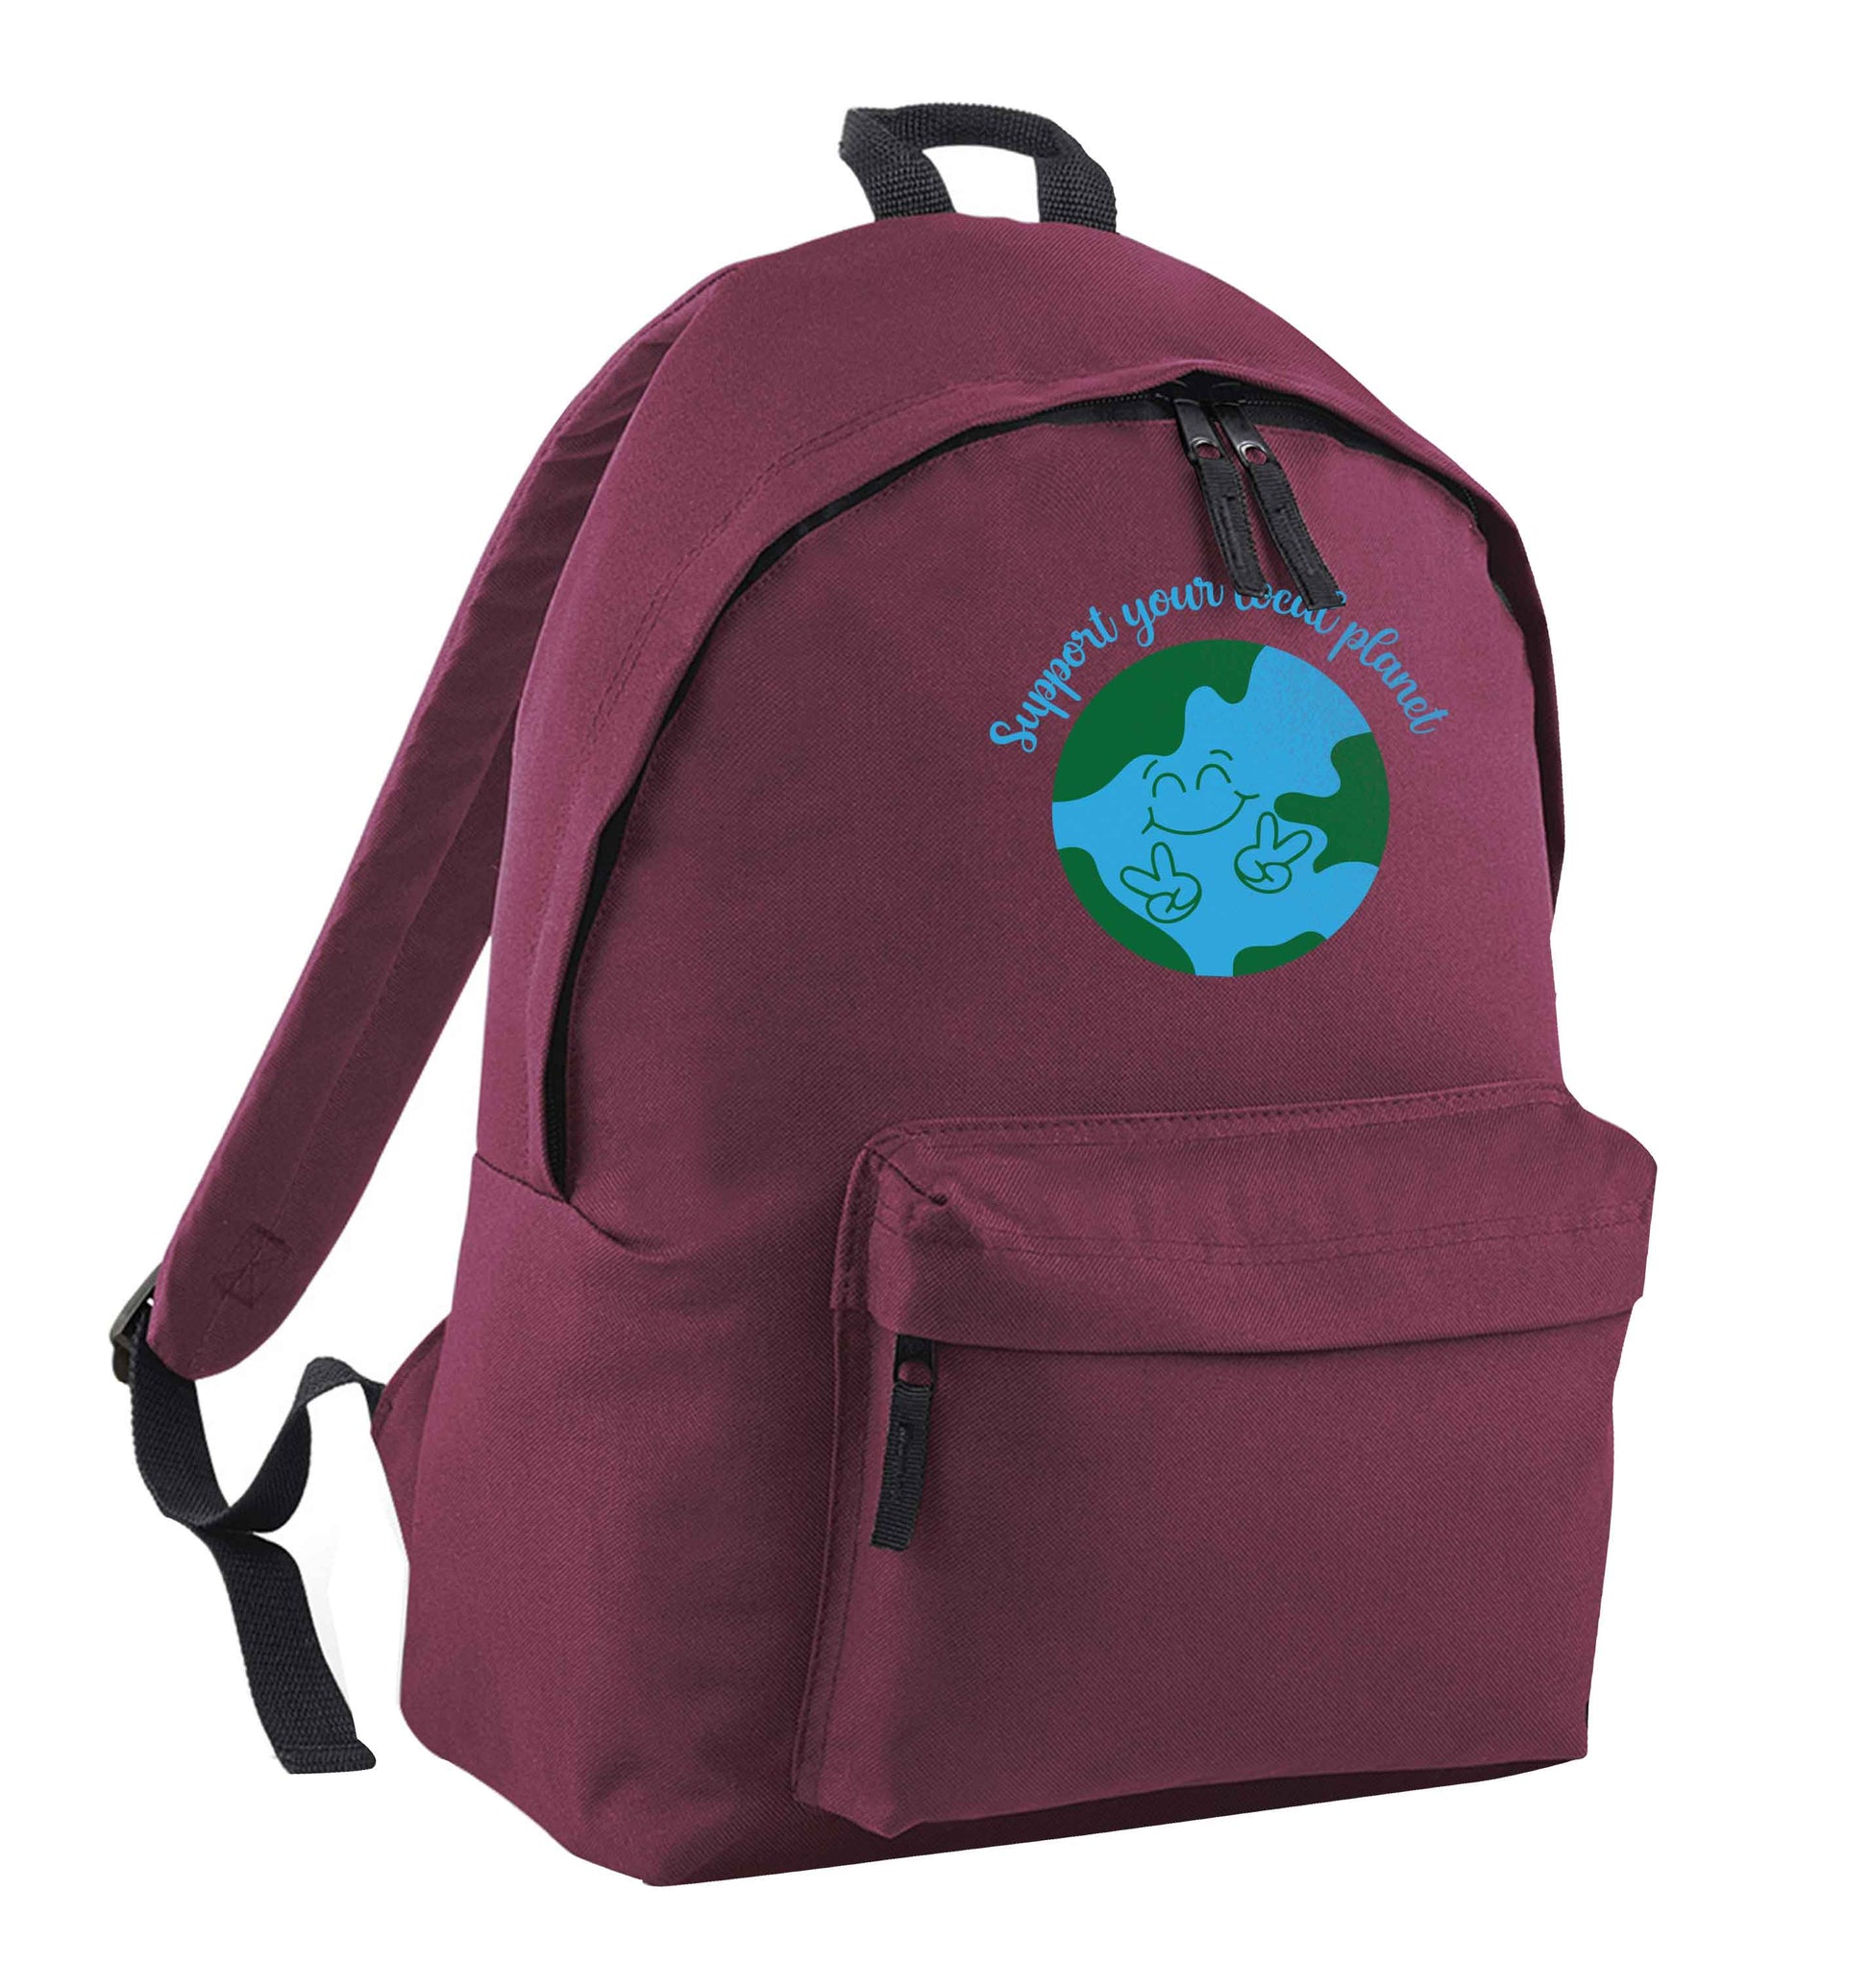 Support your local planet maroon adults backpack